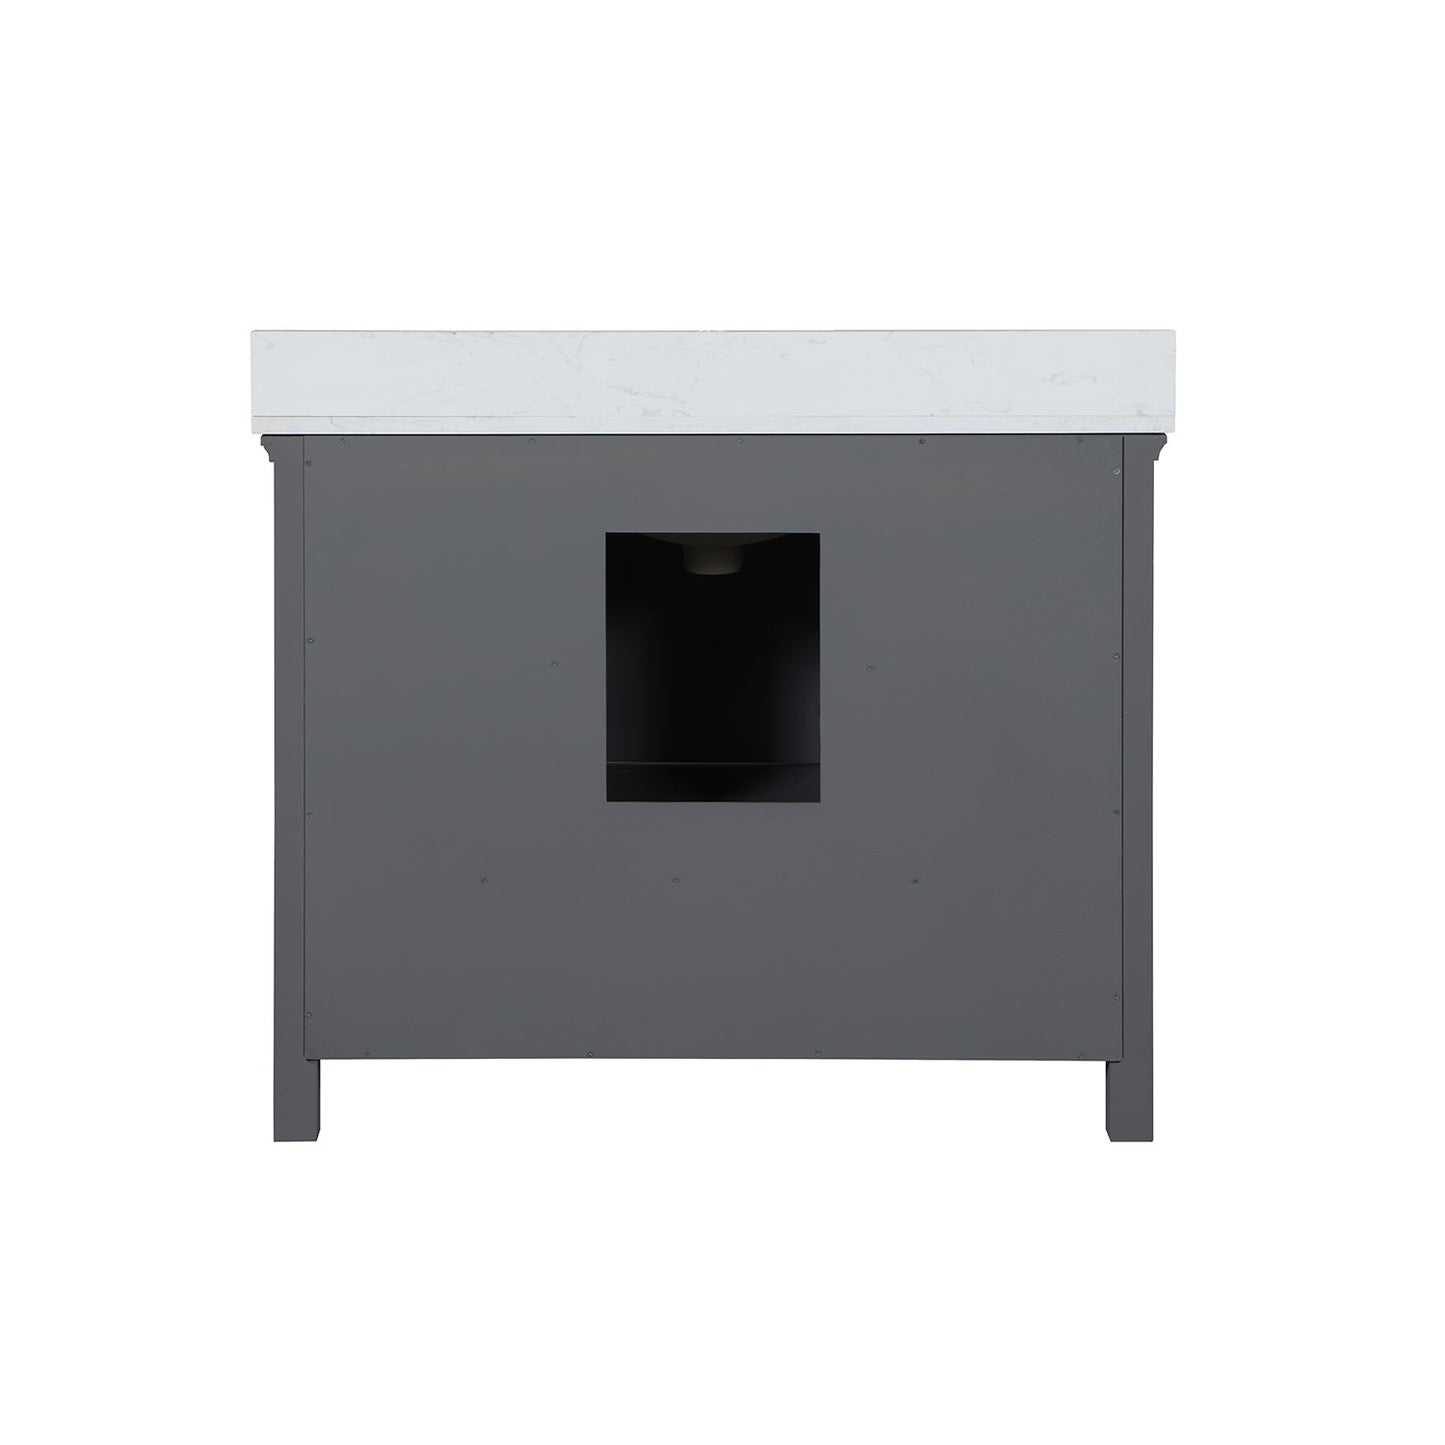 Isla 42" Single Bathroom Vanity Set in Gray and Composite Carrara White Stone Countertop without Mirror